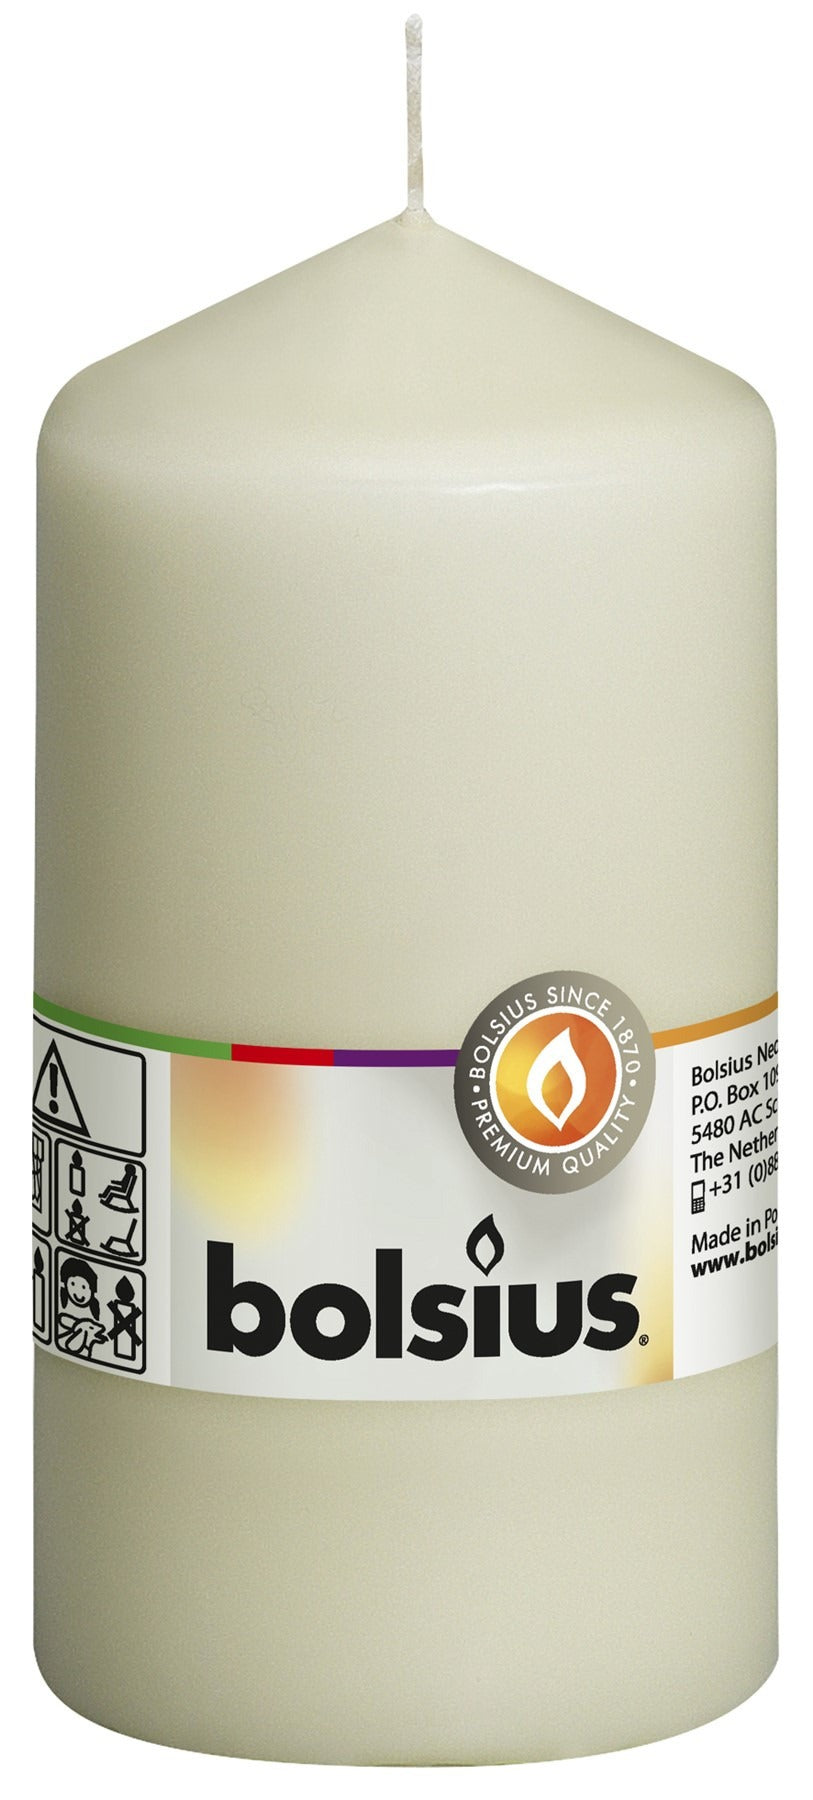 View Bolsius Ivory Pillar Candle 13070mm information